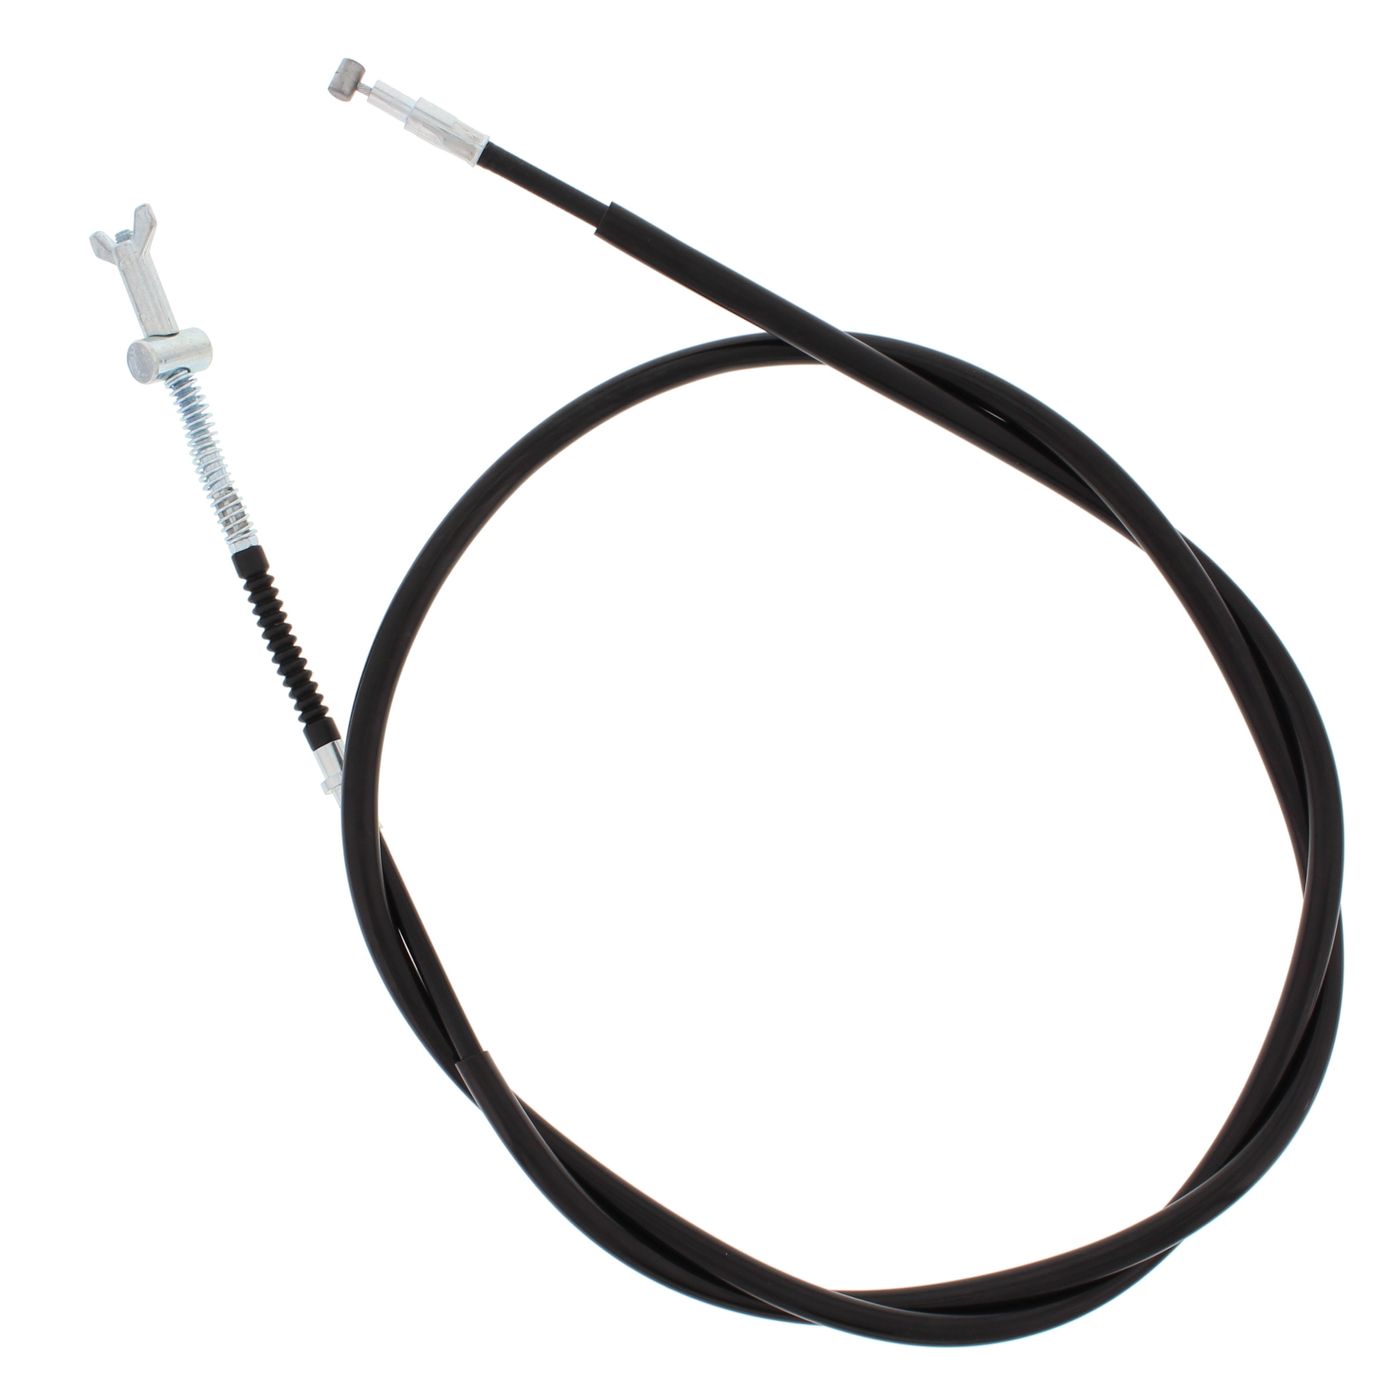 Wrp Brake Cables - WRP454016 image